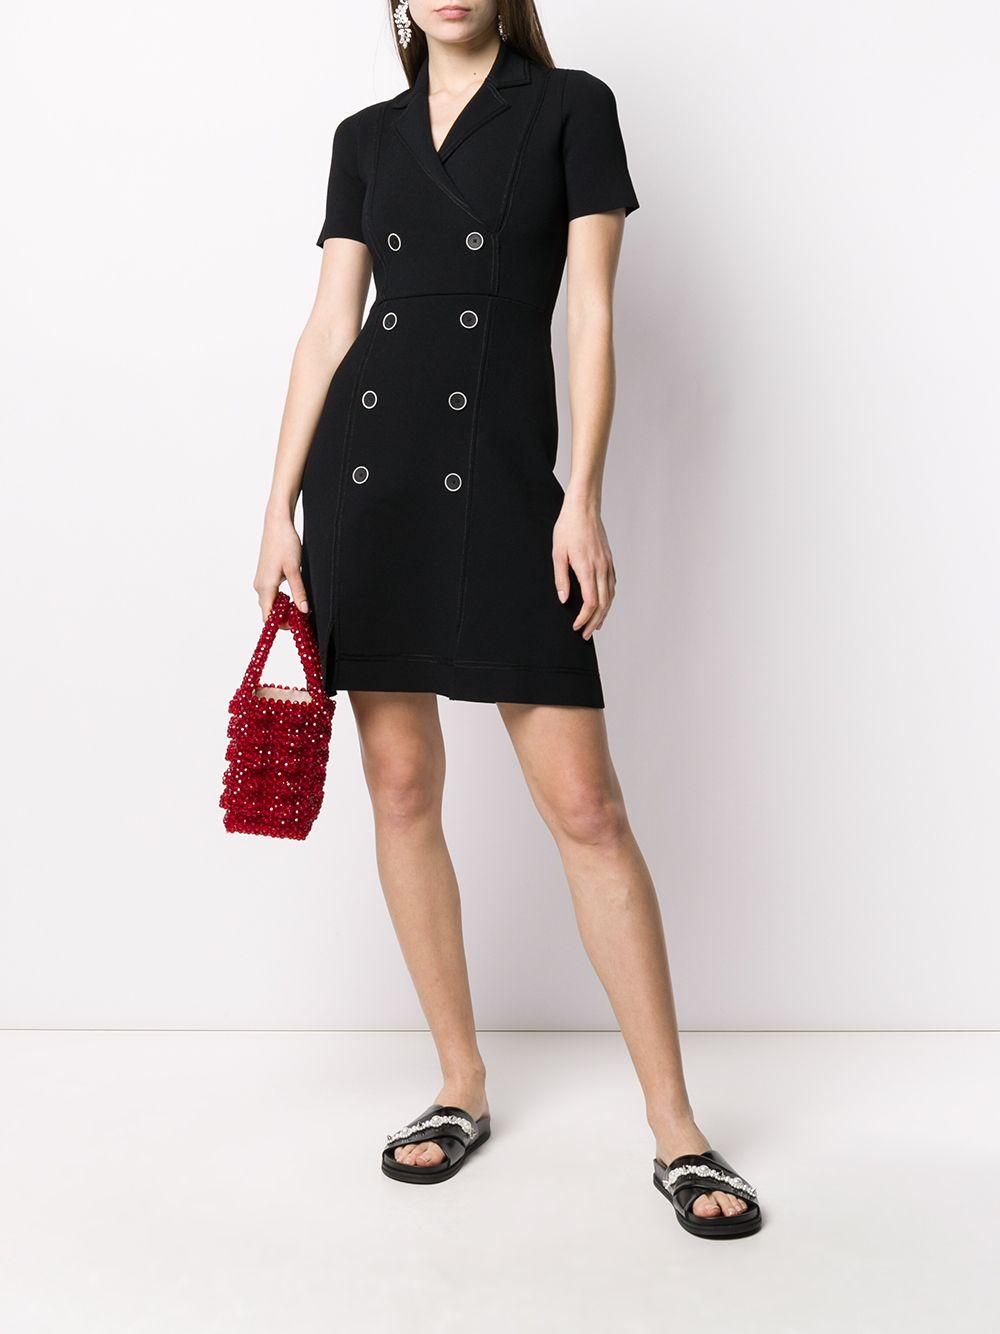 Sandro Double-breasted Dress in Black - Lyst